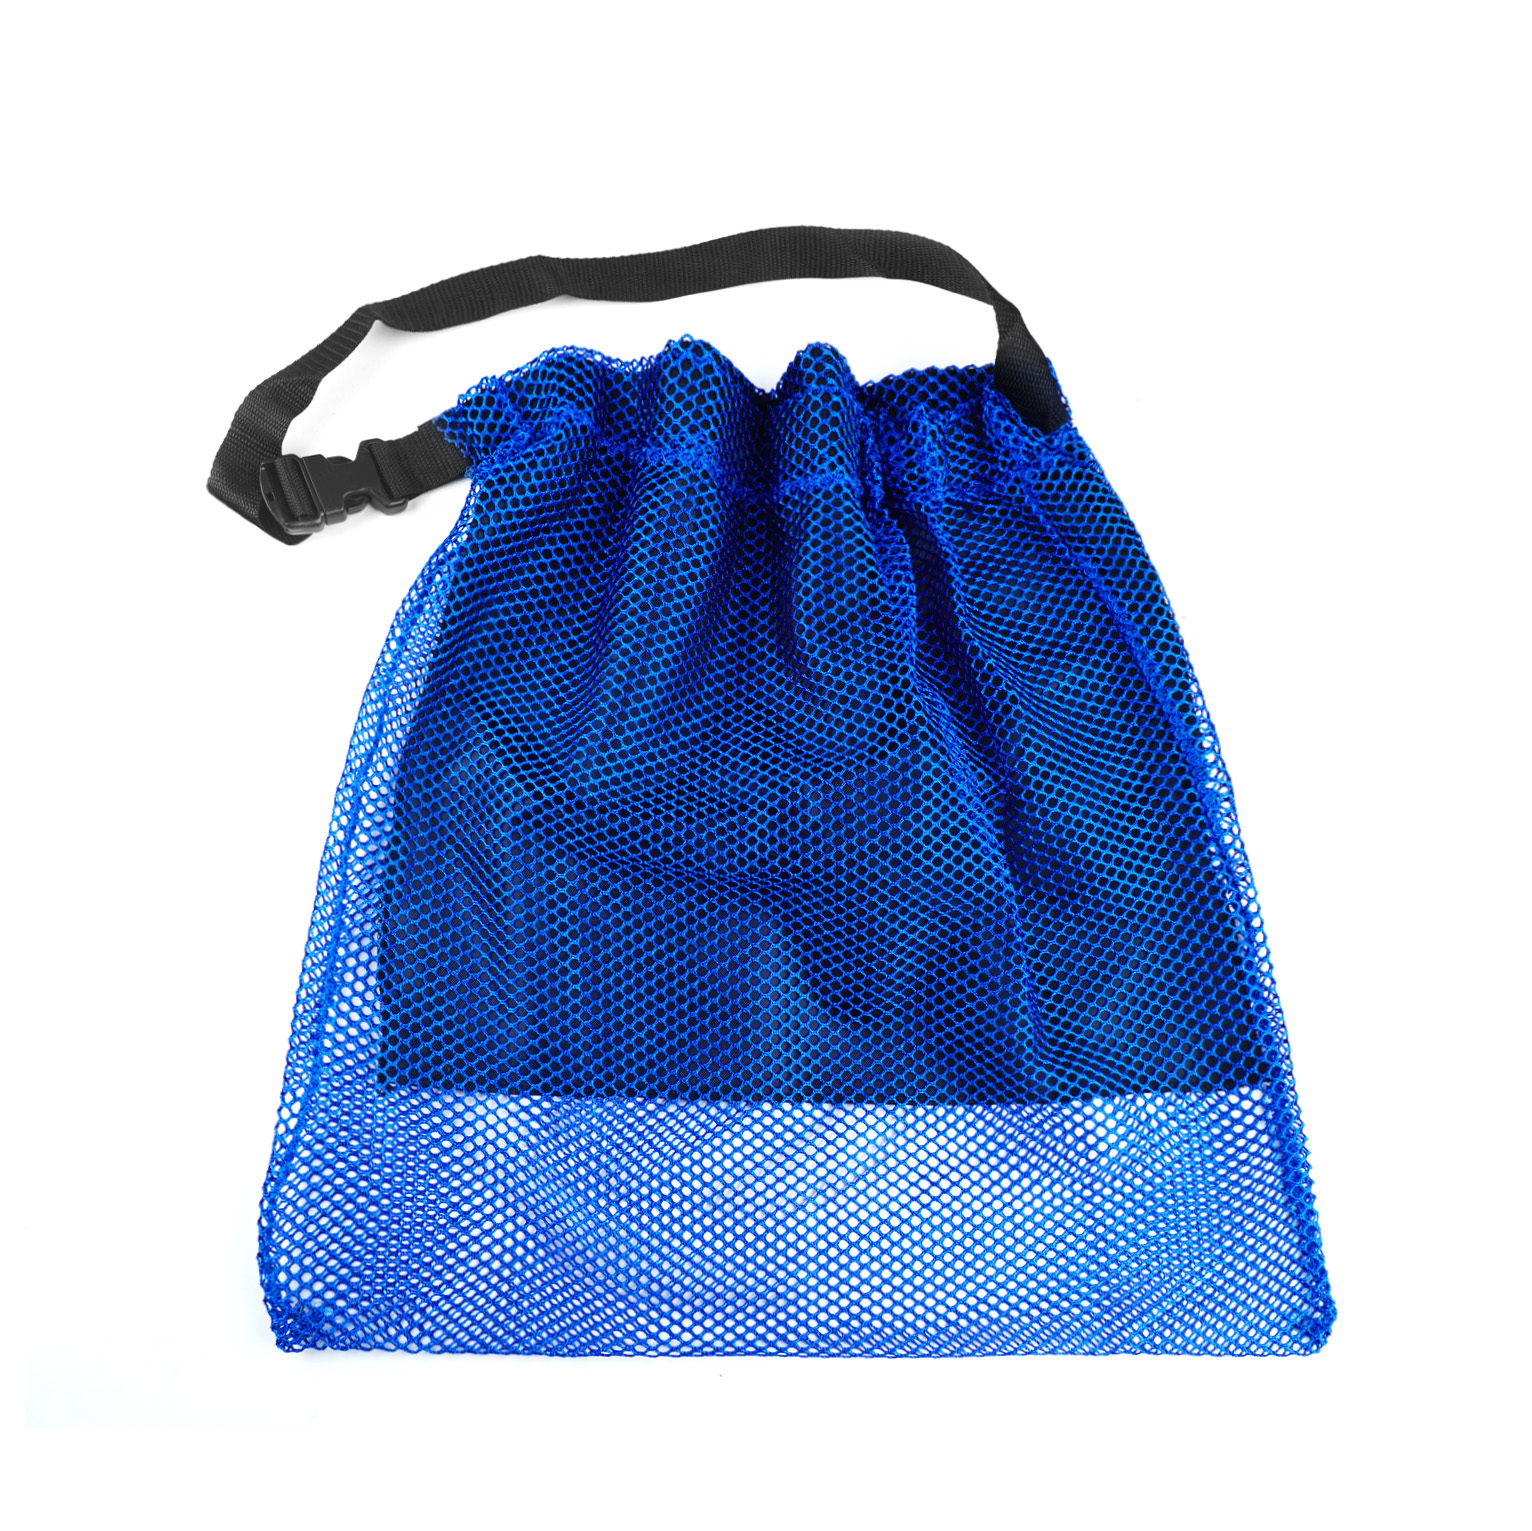 DivePRO Blue Large Size Cray Bag Waist Lobster Catch Bag with Waist ...